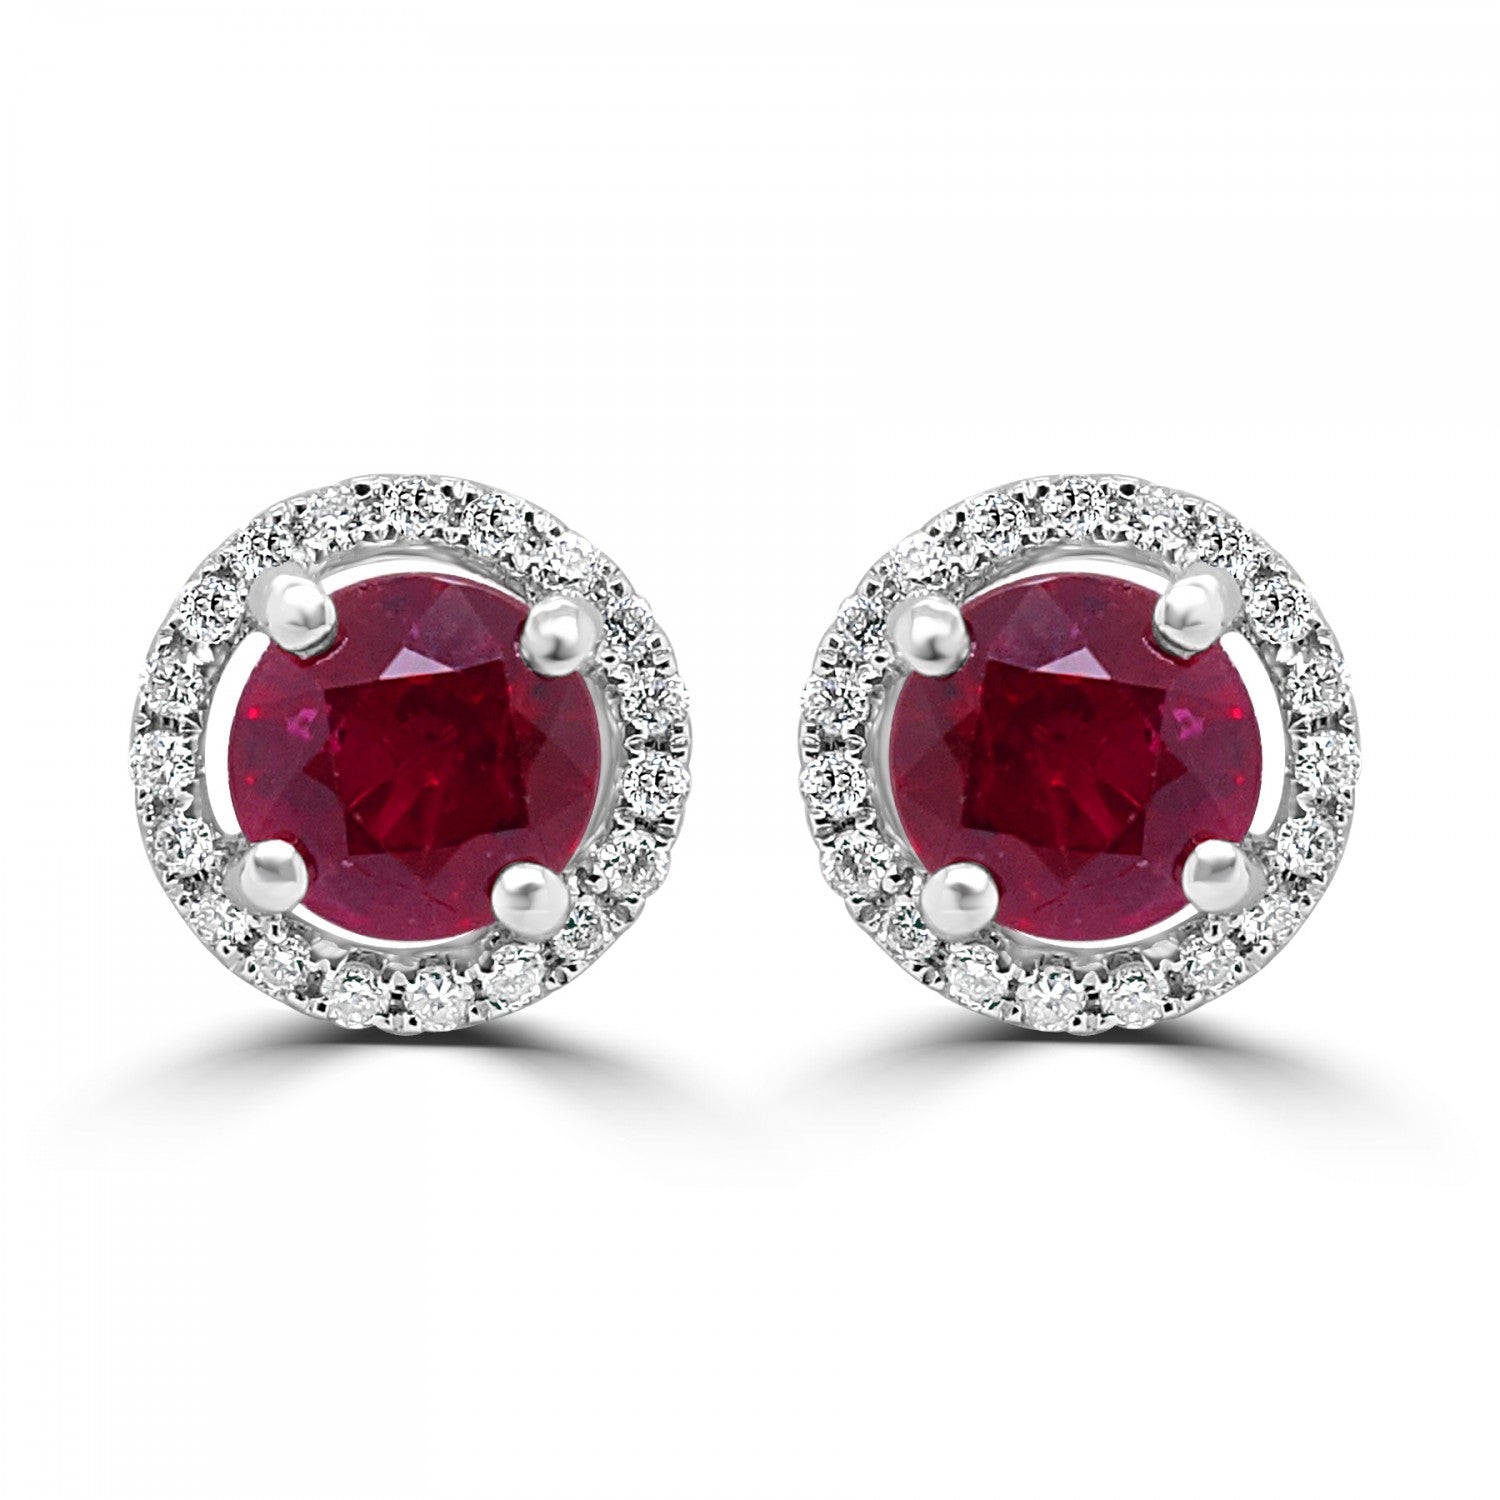 ROUND RUBY AND DIAMOND HALO STUD EARRINGS